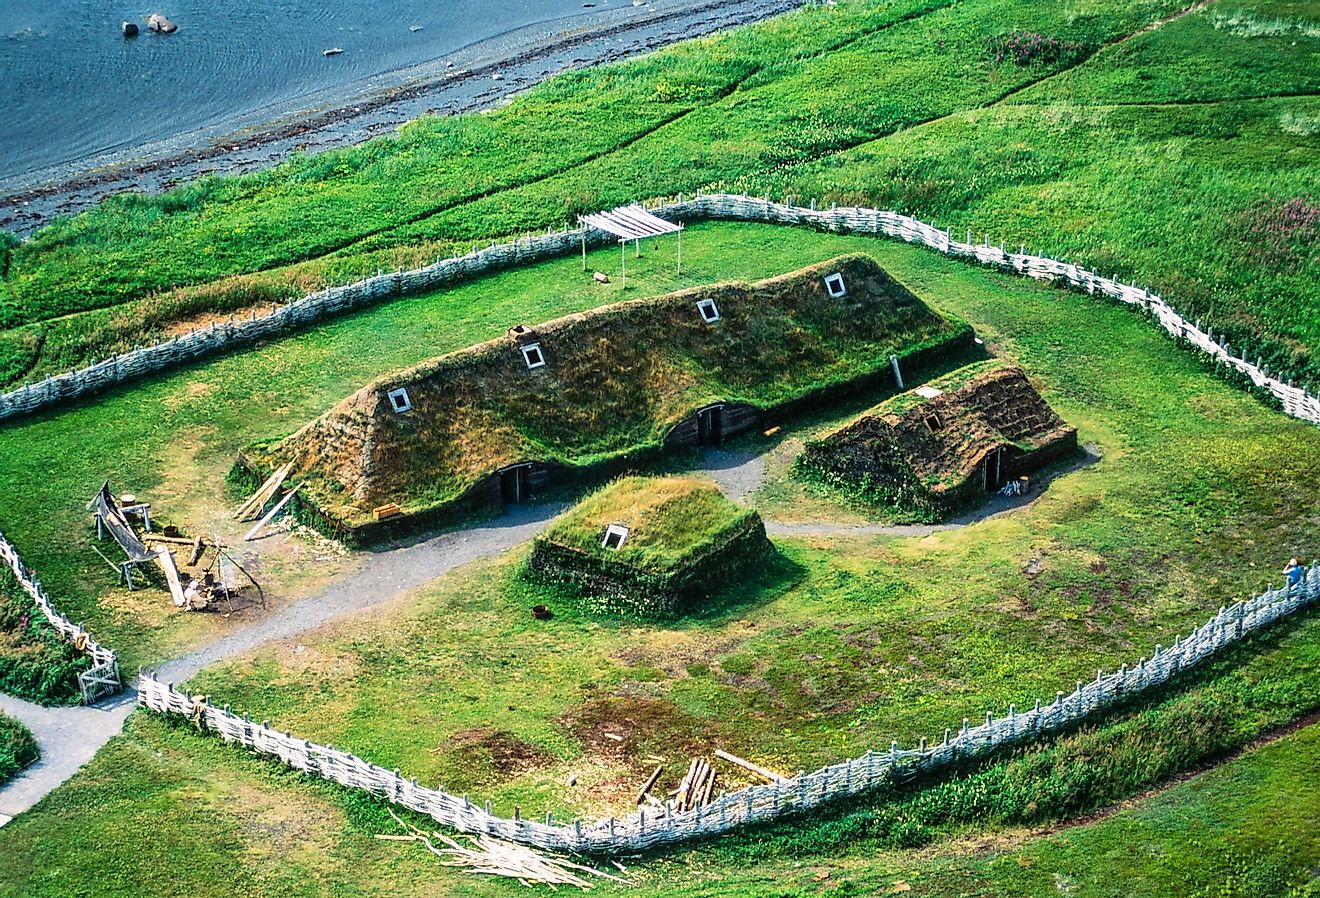 Aerial image of L'Anse aux Meadows, Newfoundland, Canada. Image credit Russ Heinl via Shutterstock